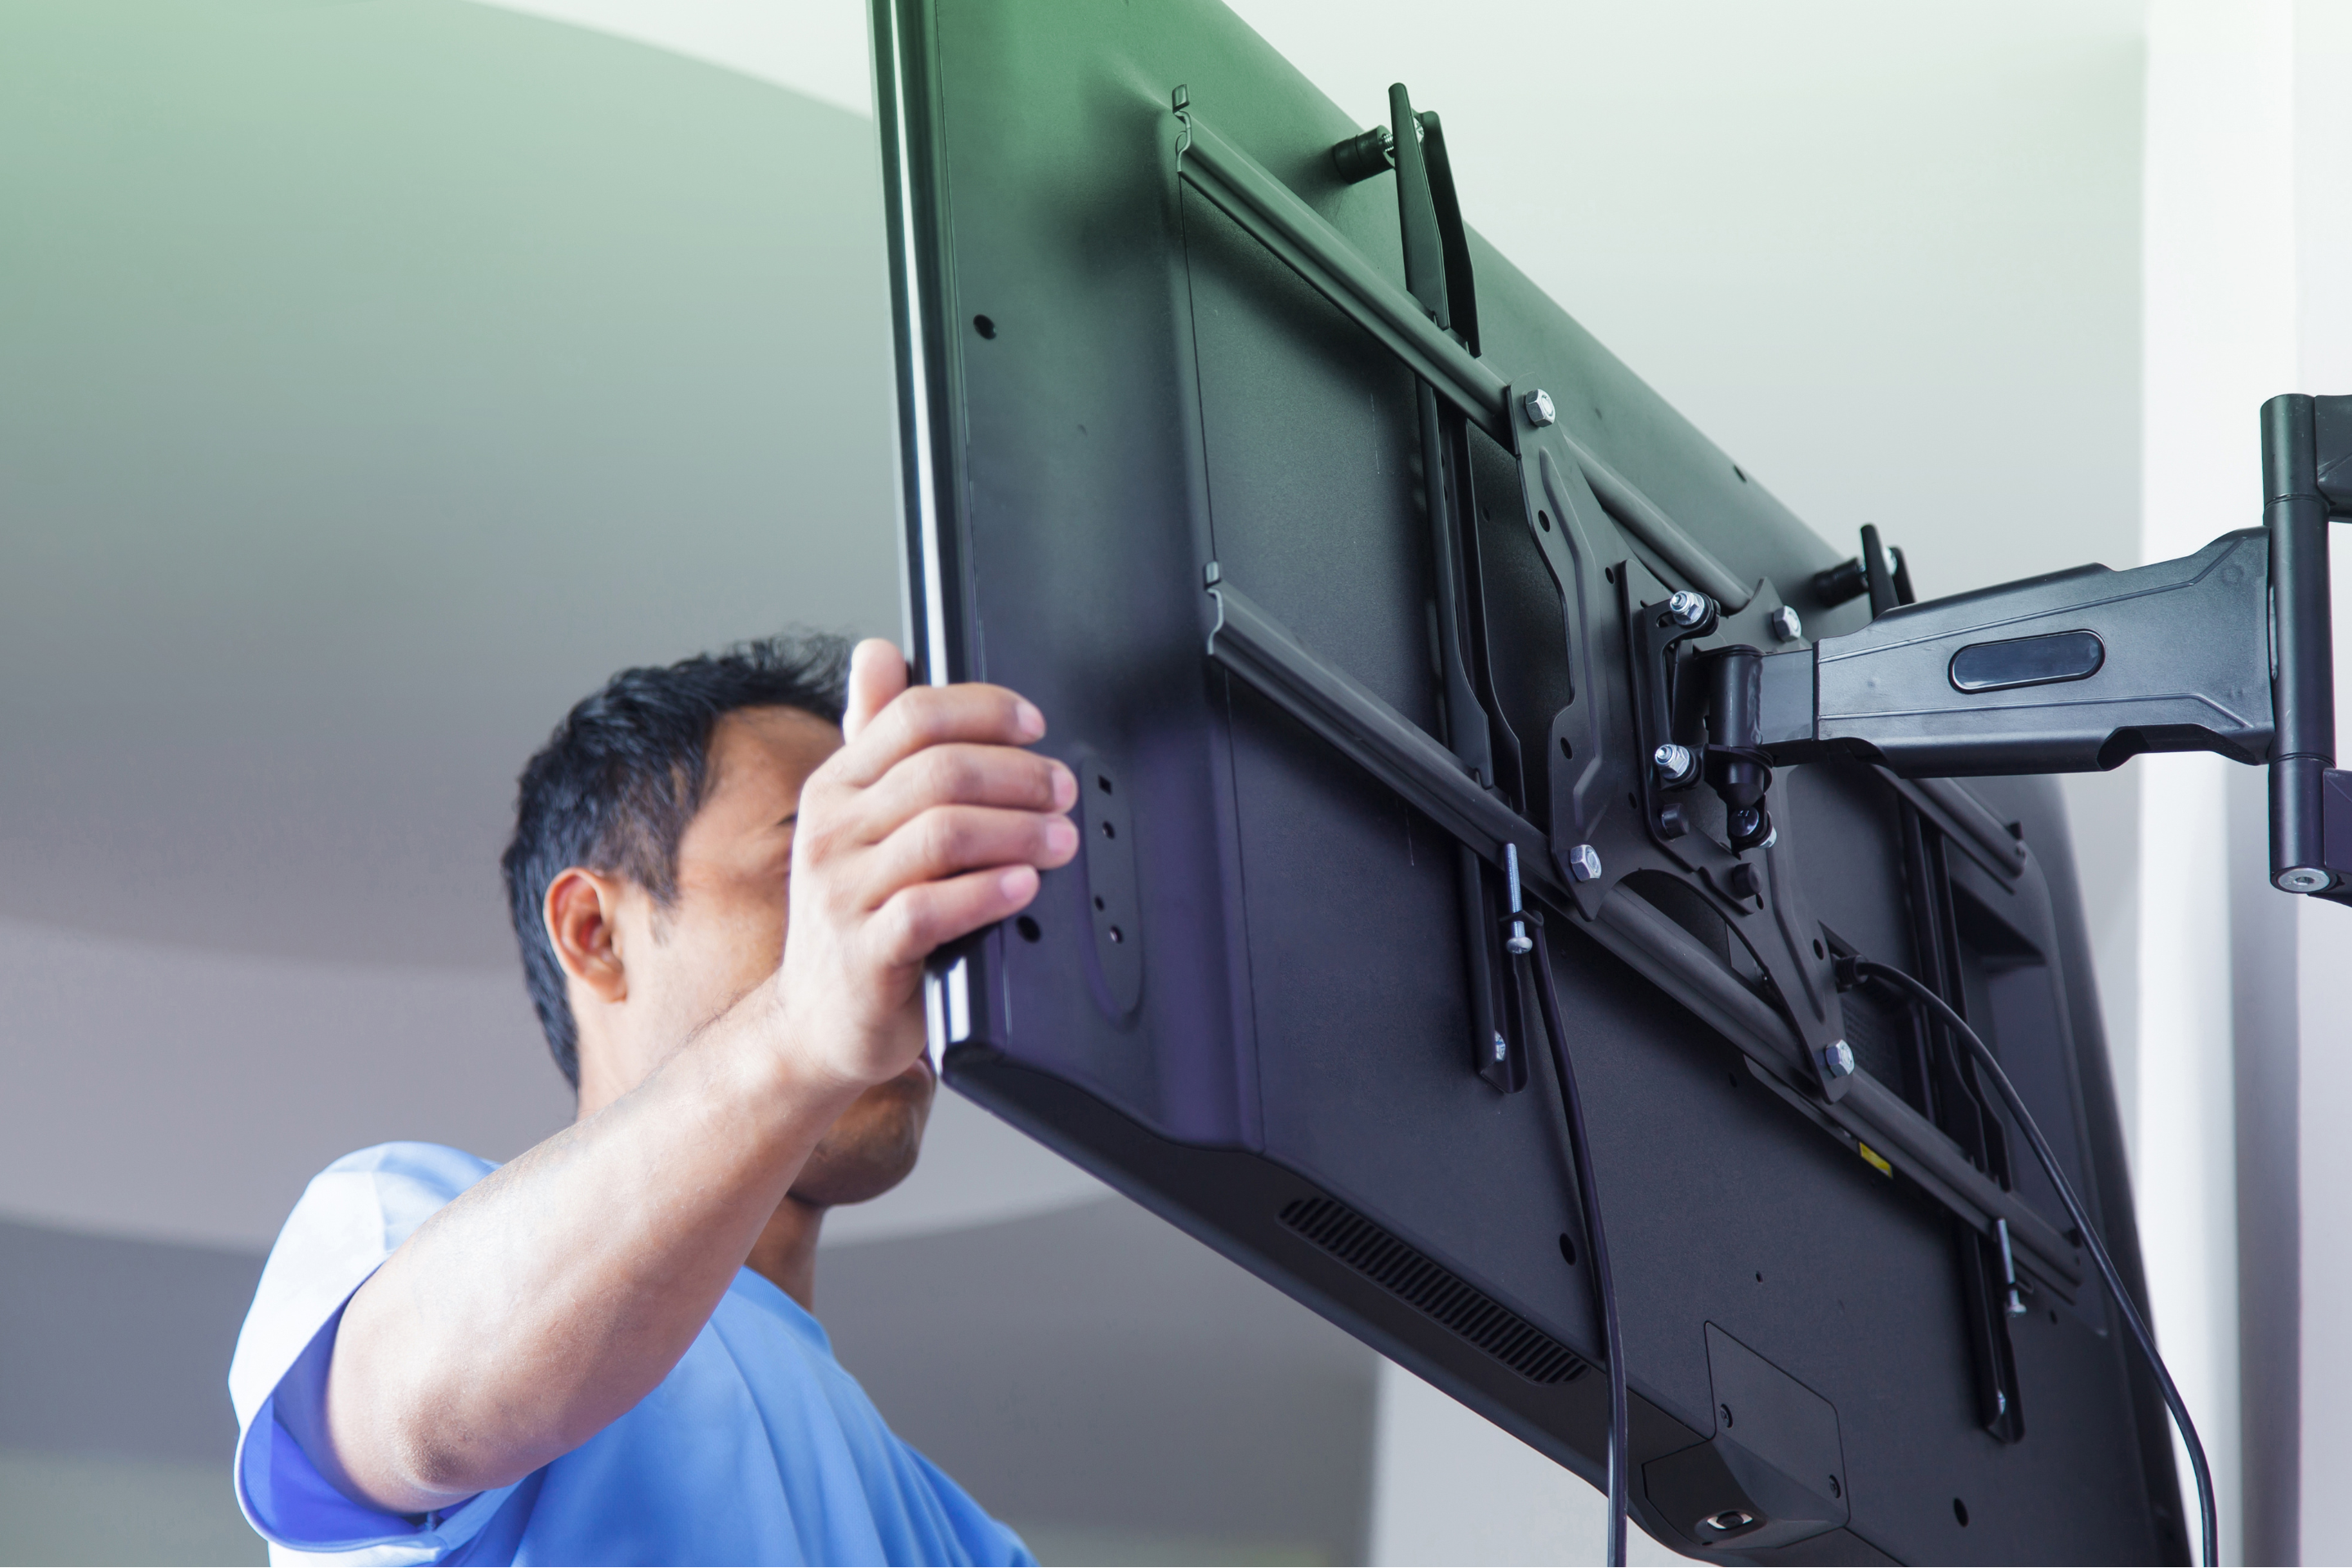 How to Hide TV Cords in Student Housing, Business Wire